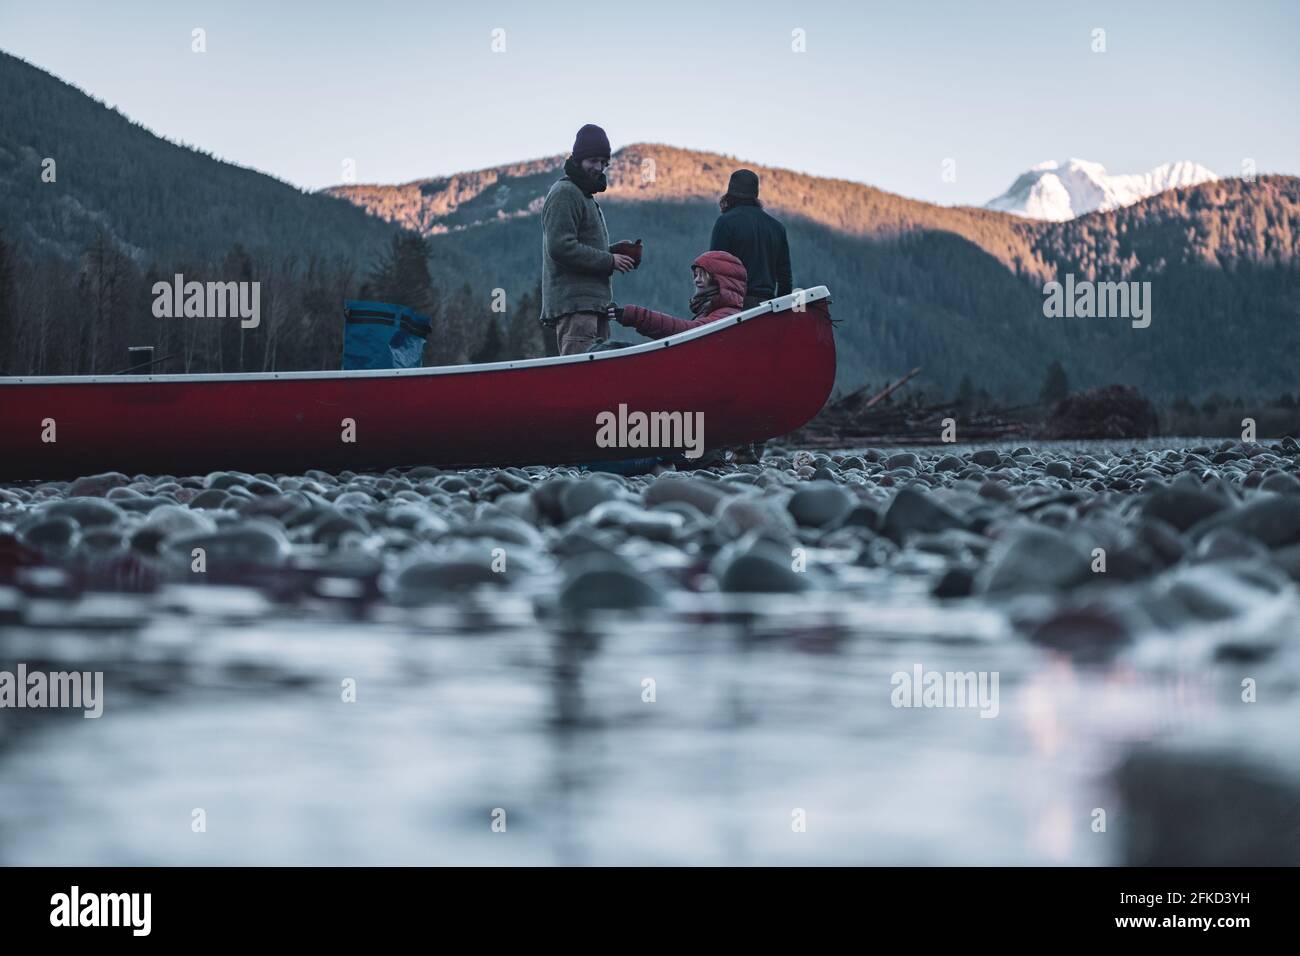 Canada, British Columbia, Friends with canoe resting at Squamish River Stock Photo